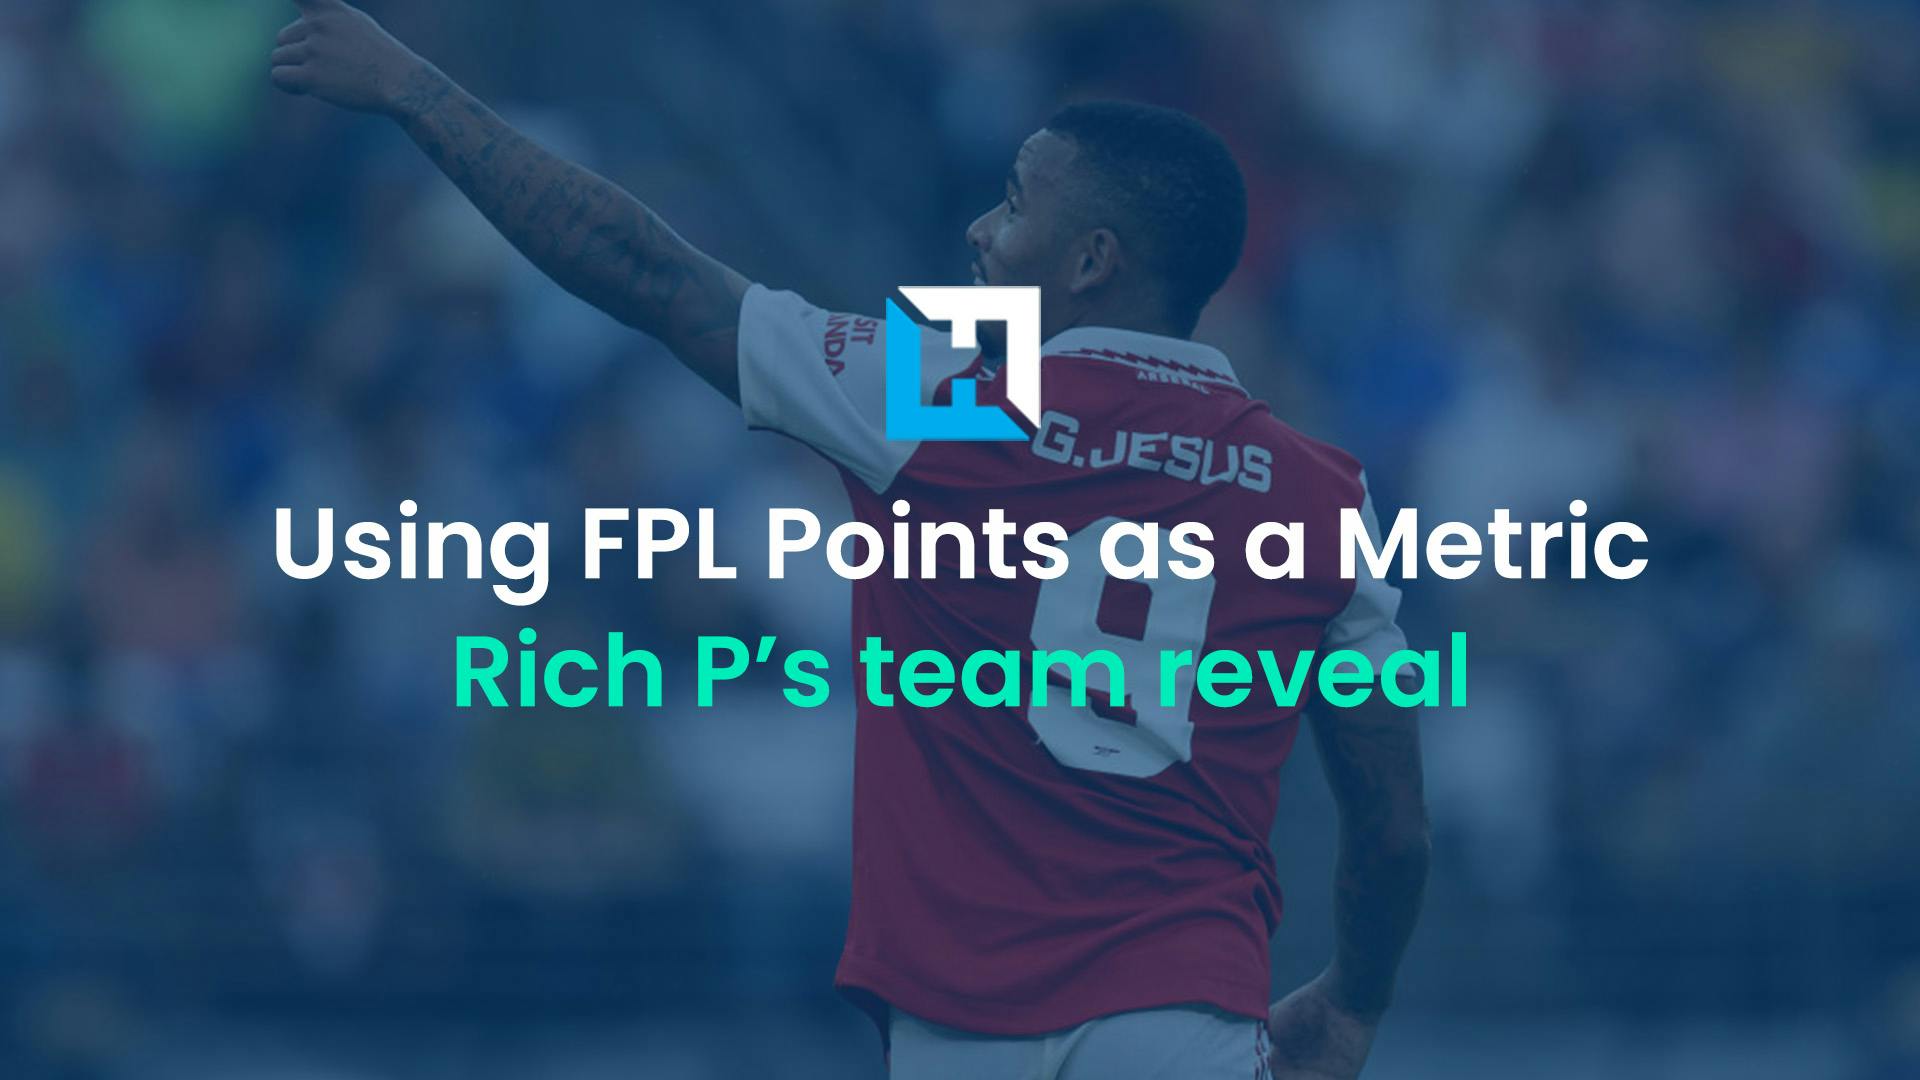 Using FPL Points as a Metric: Gameweek 5 team reveal 2022/23